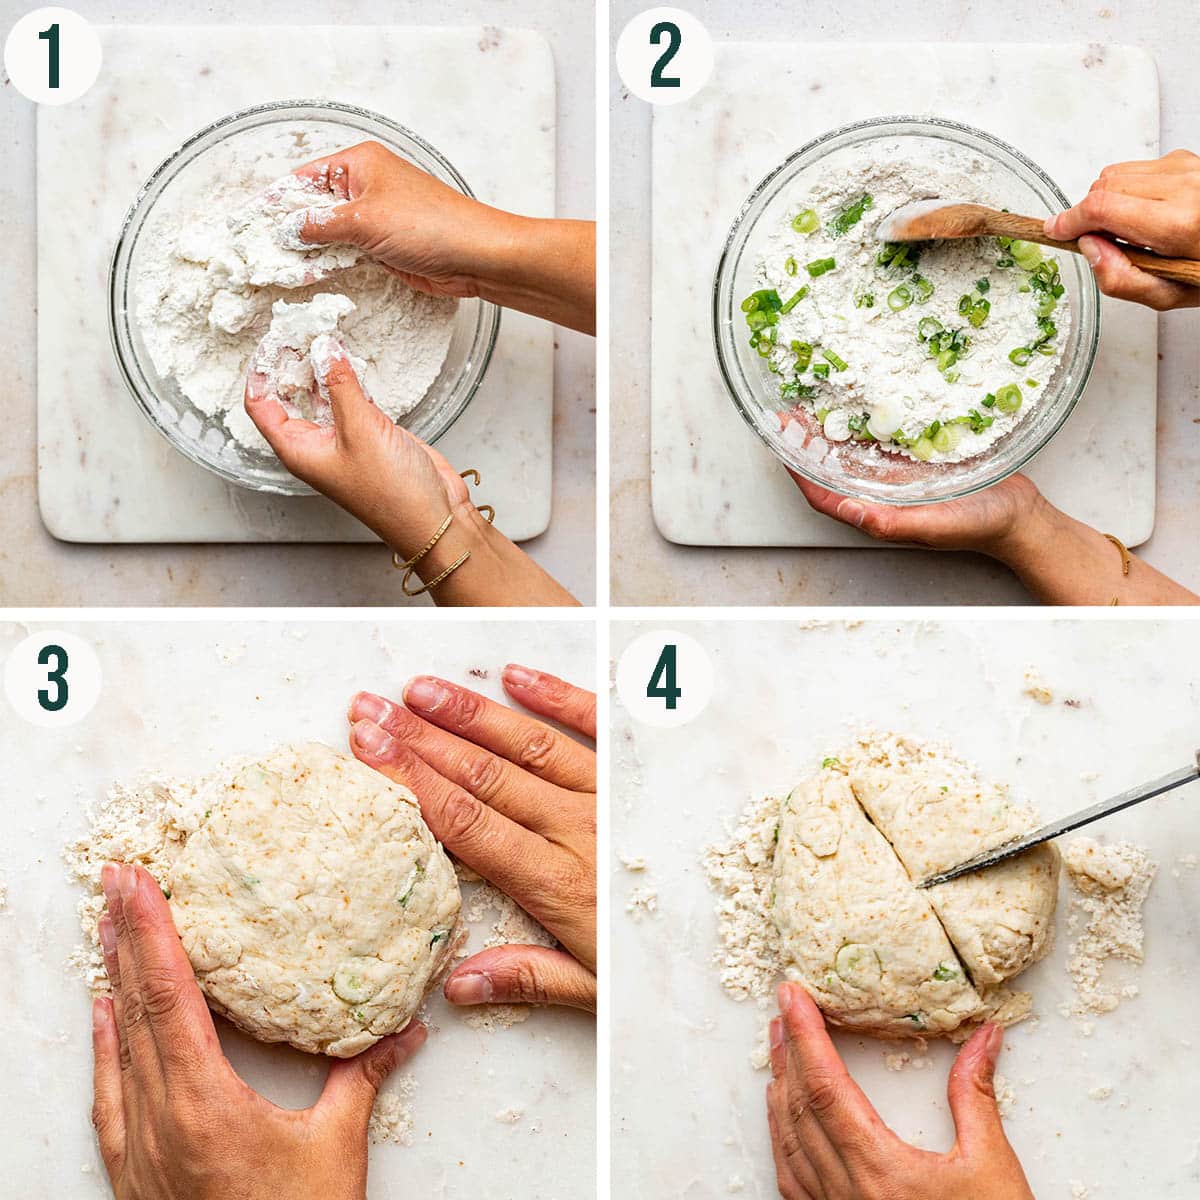 Spring onion biscuits steps 1 to 4, making and dividing the dough.